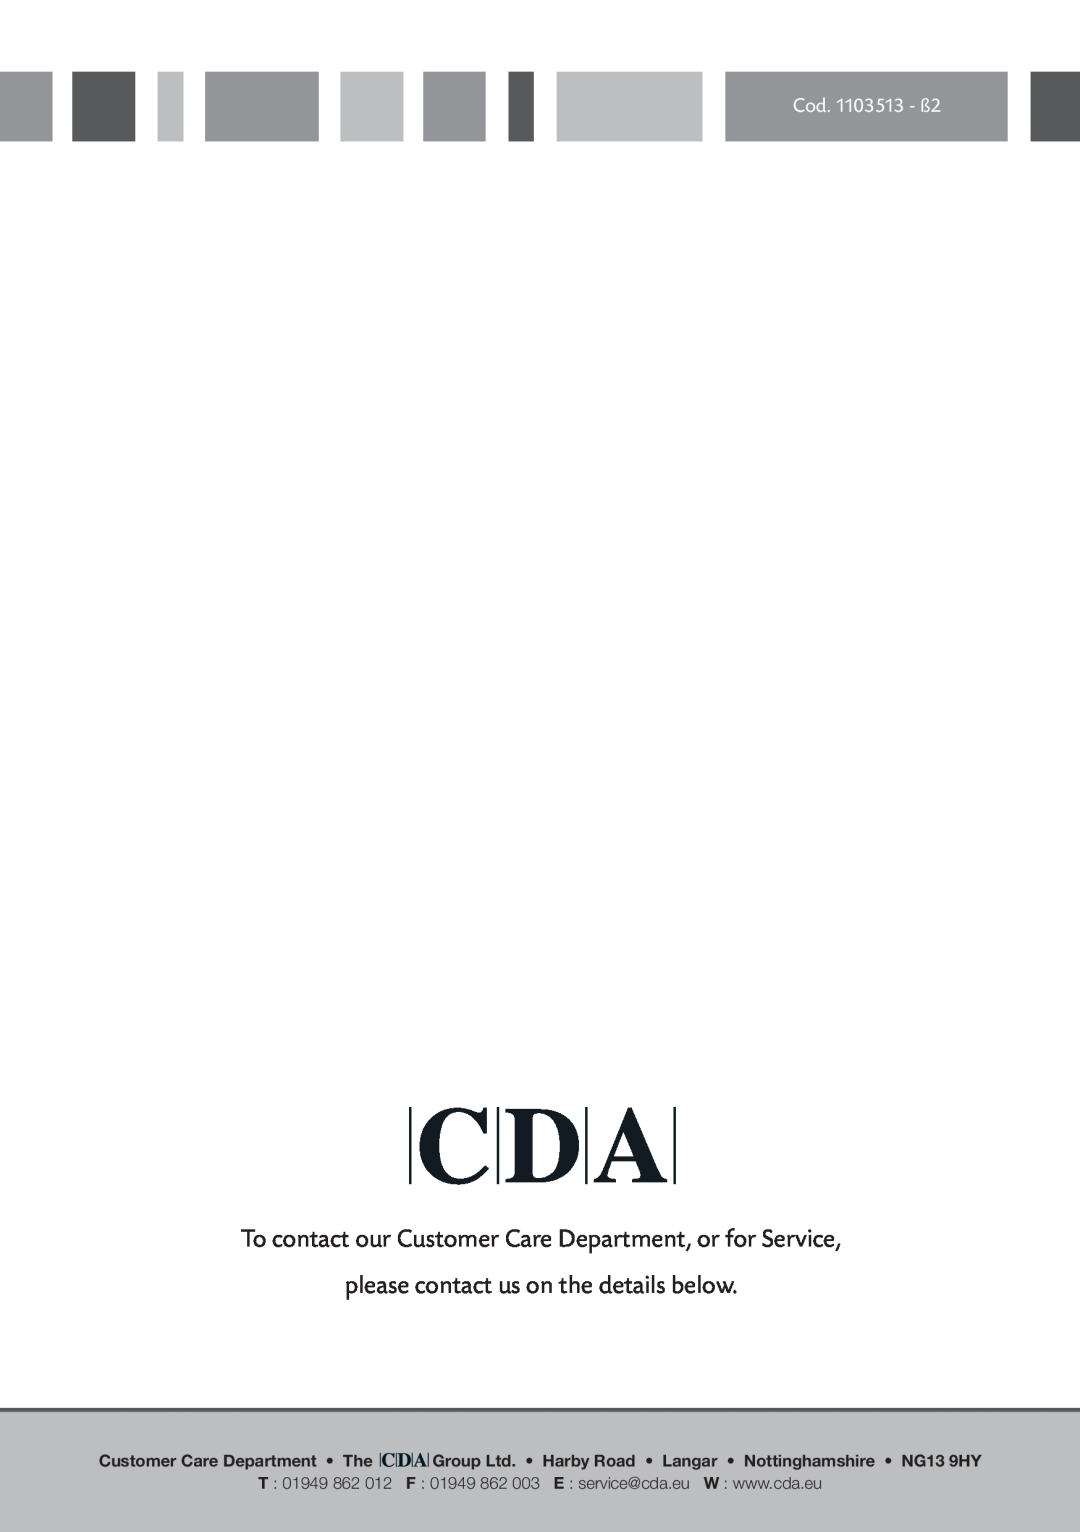 CDA 11Z6 manual To contact our Customer Care Department, or for Service, please contact us on the details below 